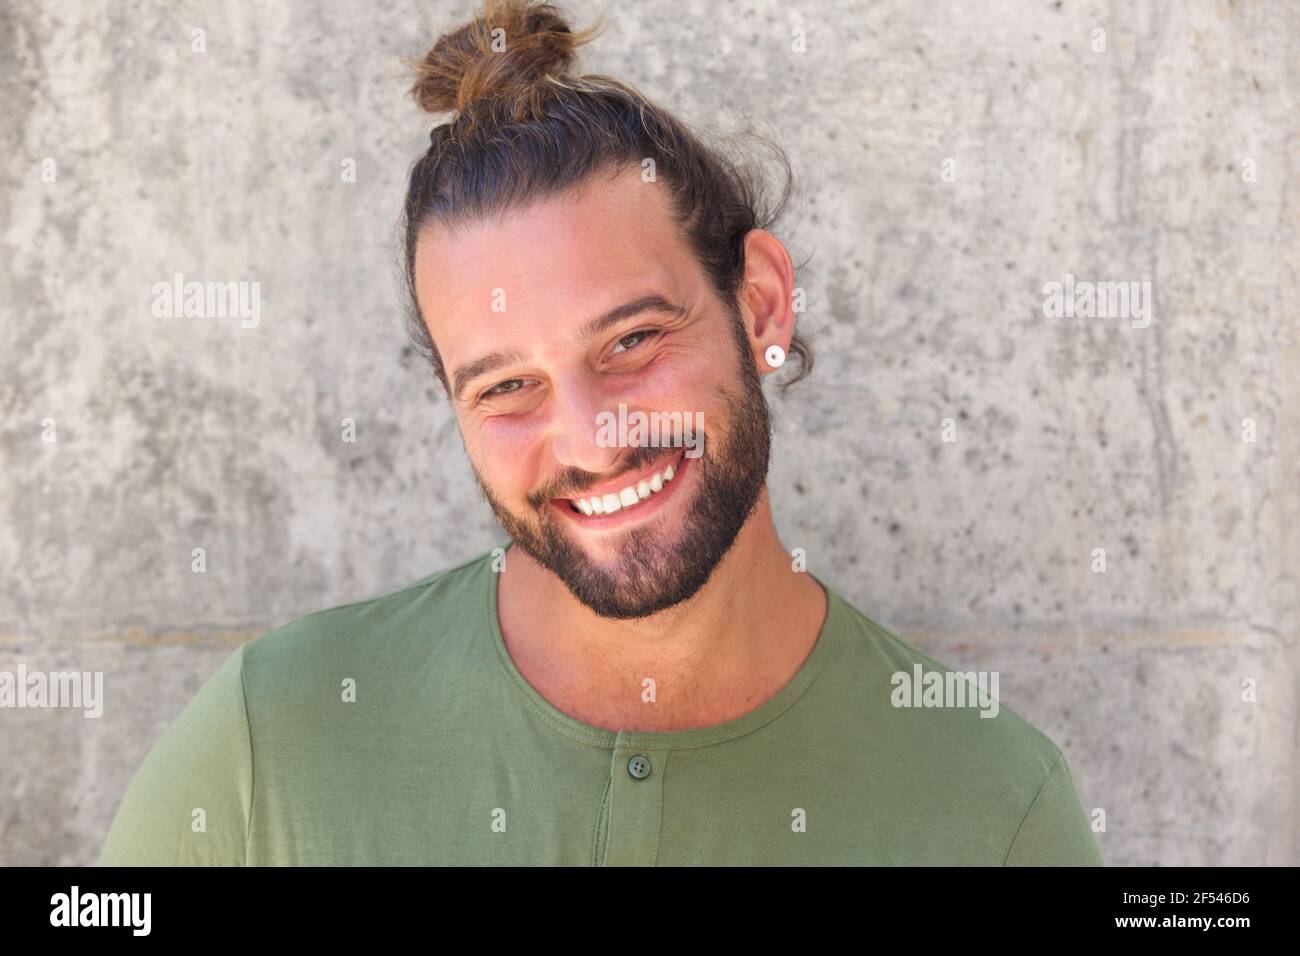 Close up portrait of smiling man with ponytail and beard Stock Photo